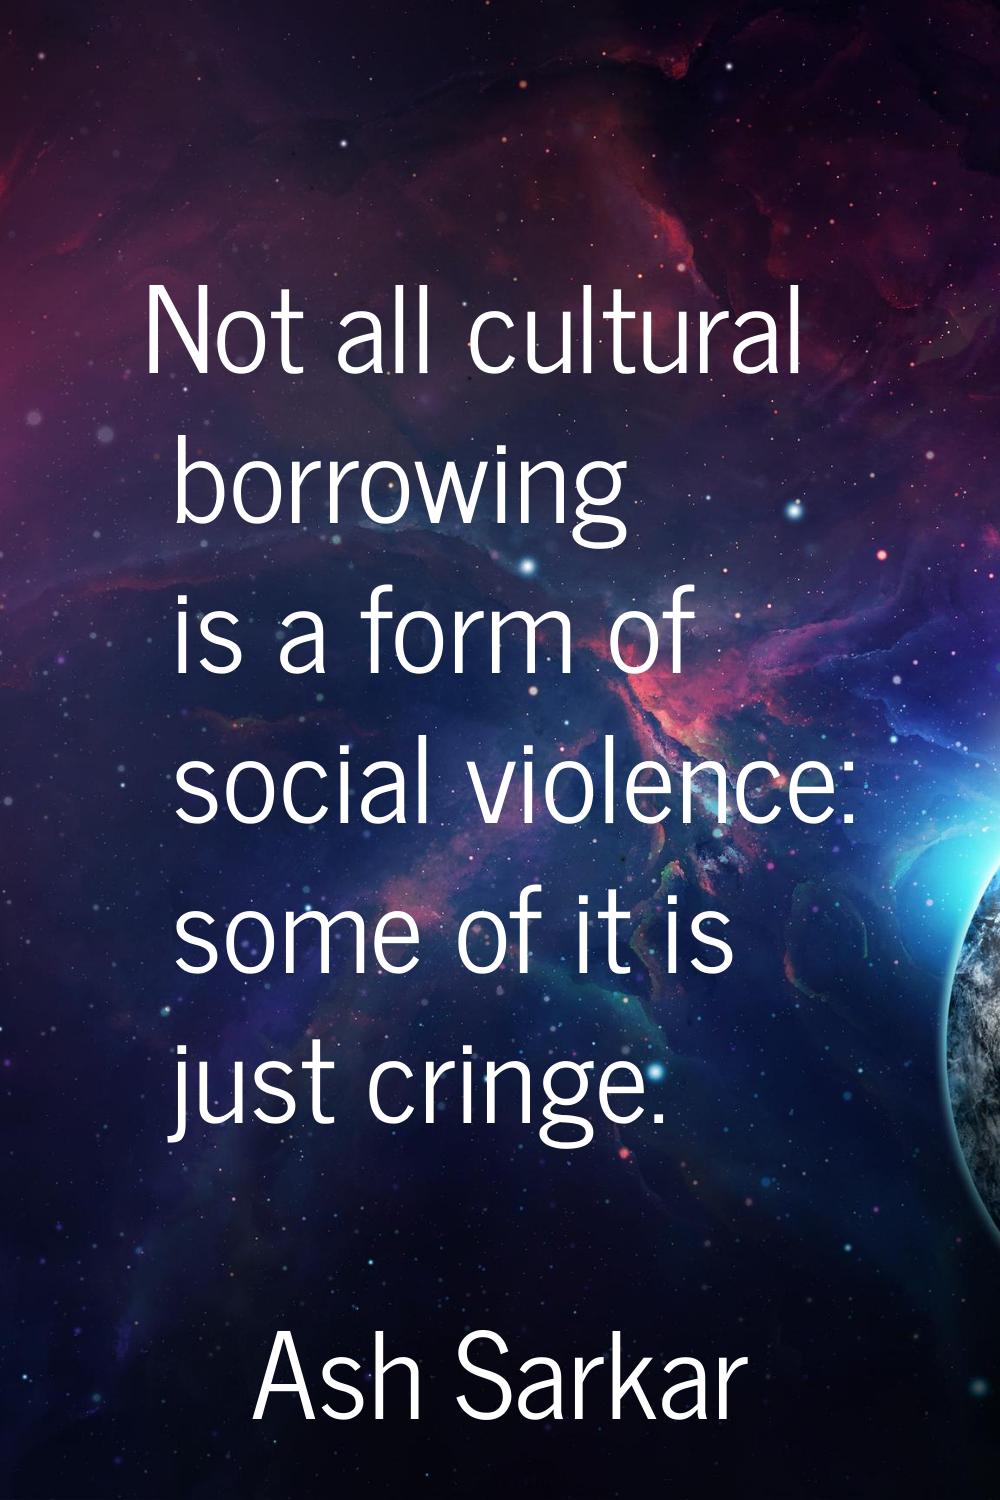 Not all cultural borrowing is a form of social violence: some of it is just cringe.